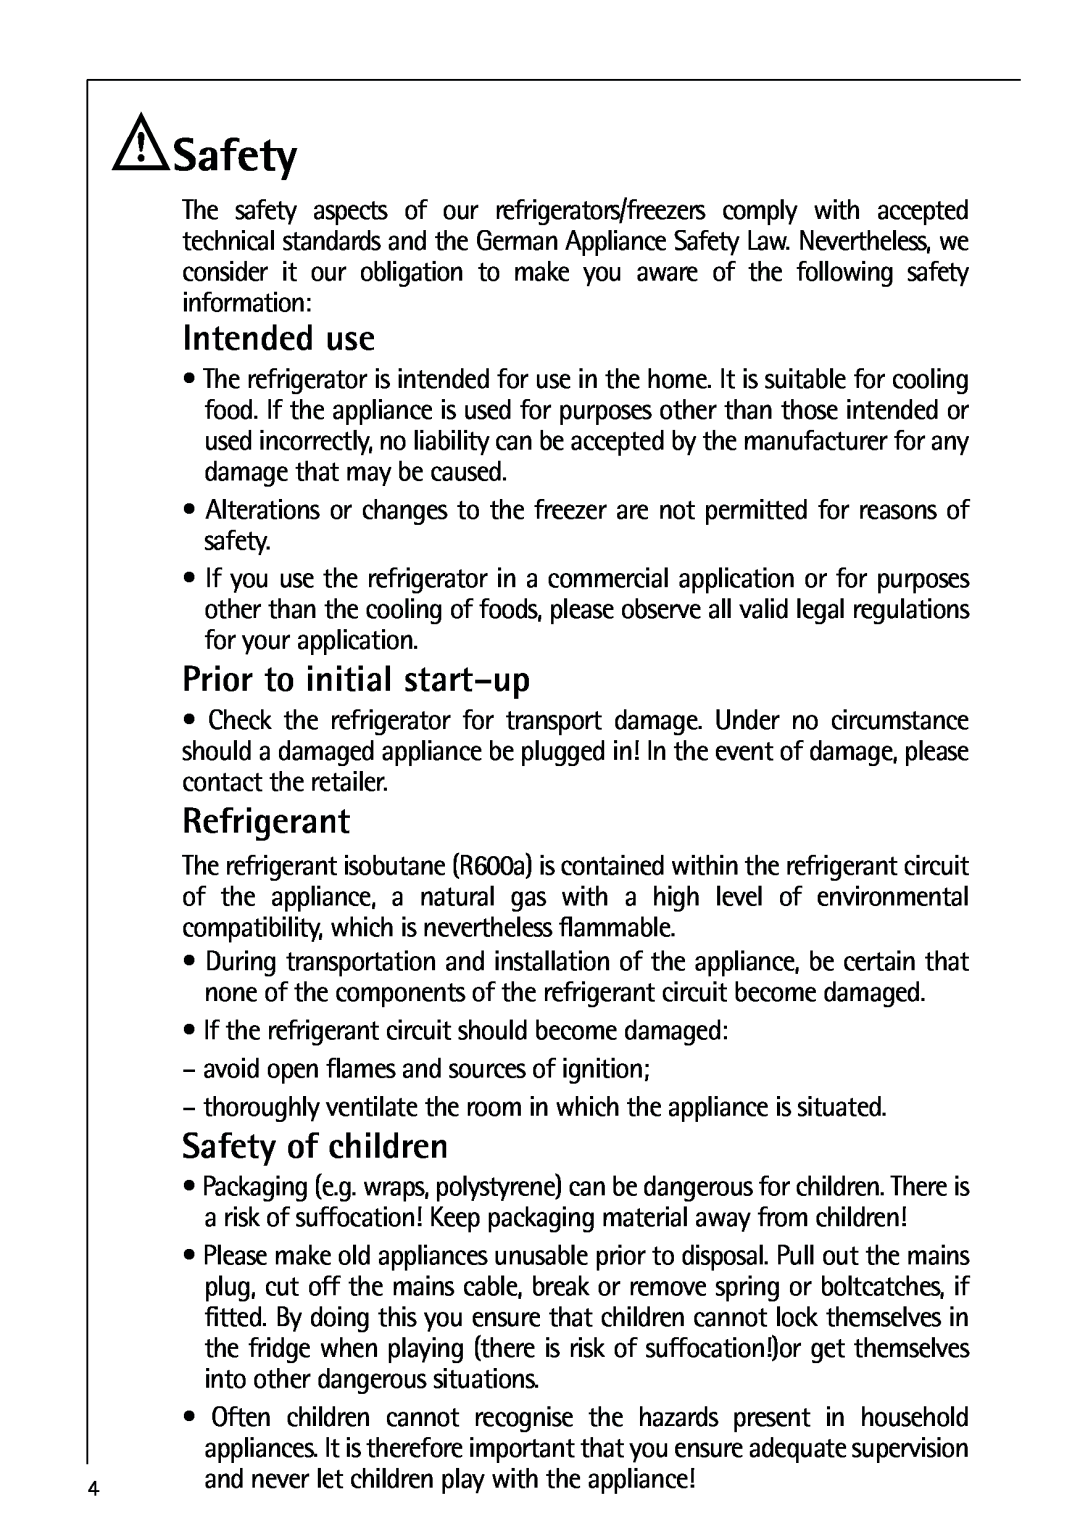 Electrolux 72398 KA user manual Intended use, Prior to initial start-up, Refrigerant, Safety of children 